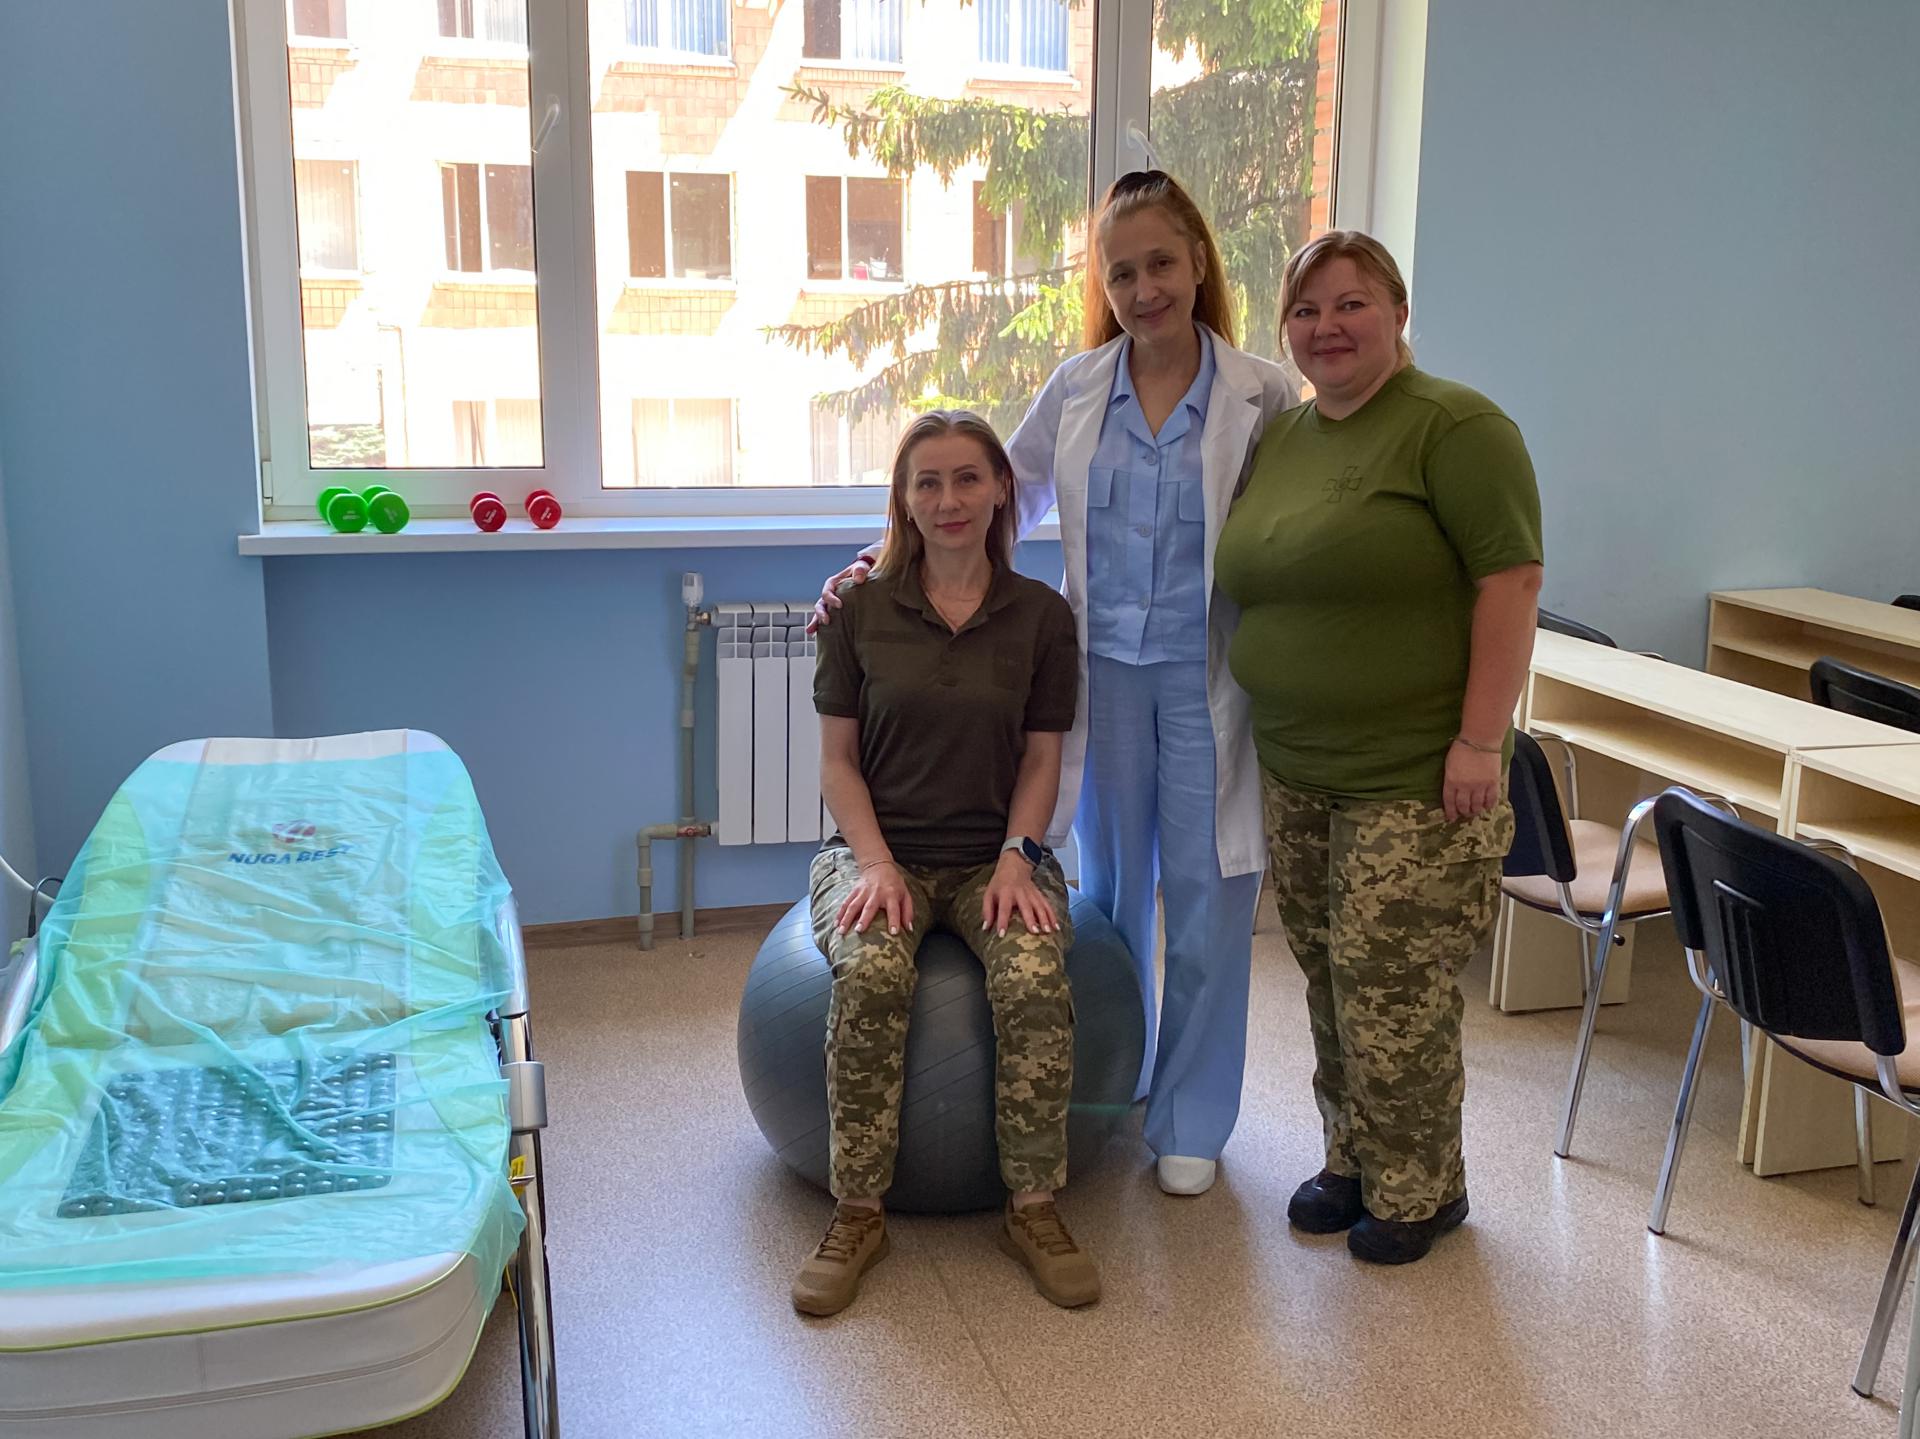 Veteran Development Centre of Poltava Polytechnic provides professional support on the way of reintegrating veterans of the Armed Forces of Ukraine into civilian life